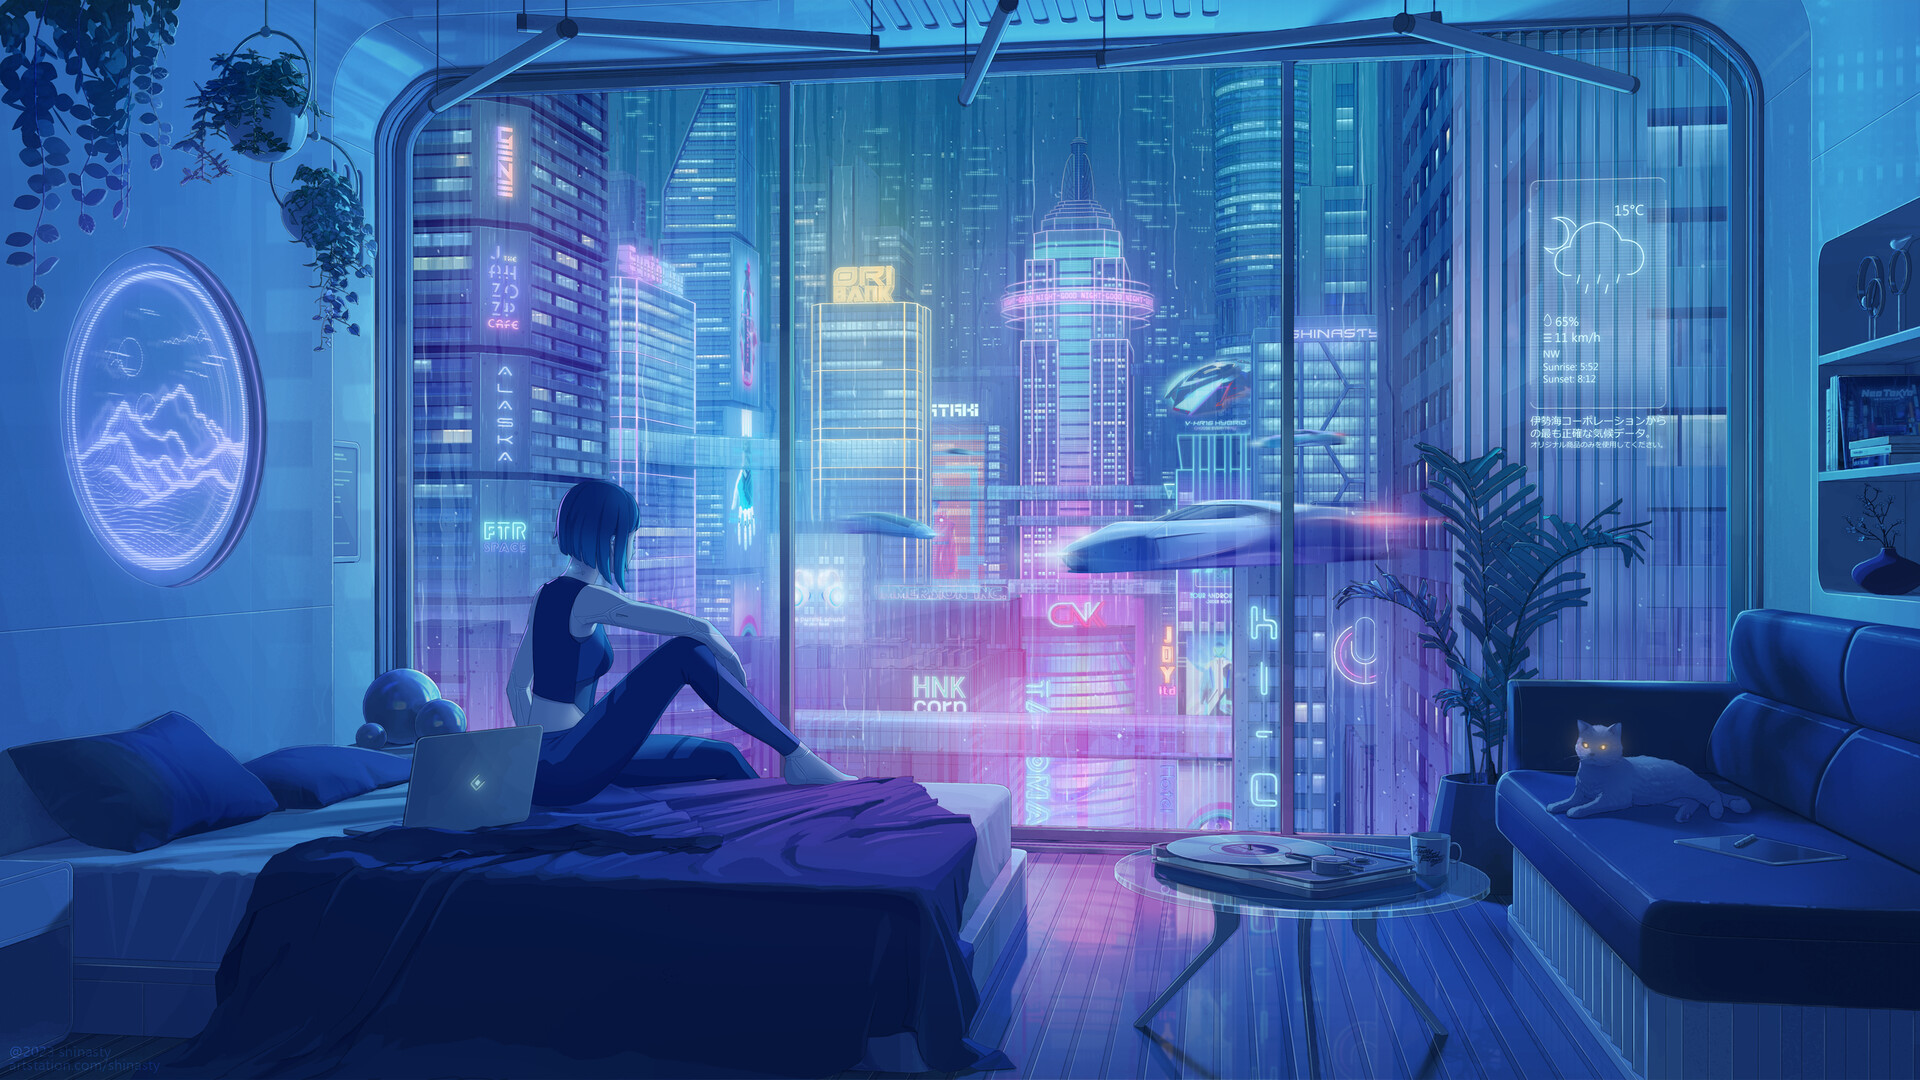 General 1920x1080 digital art artwork illustration room indoors environment interior women sitting bed futuristic window building science fiction Anastasia Ermakova city laptop animals cats women indoors in bed pillow couch table cyberpunk